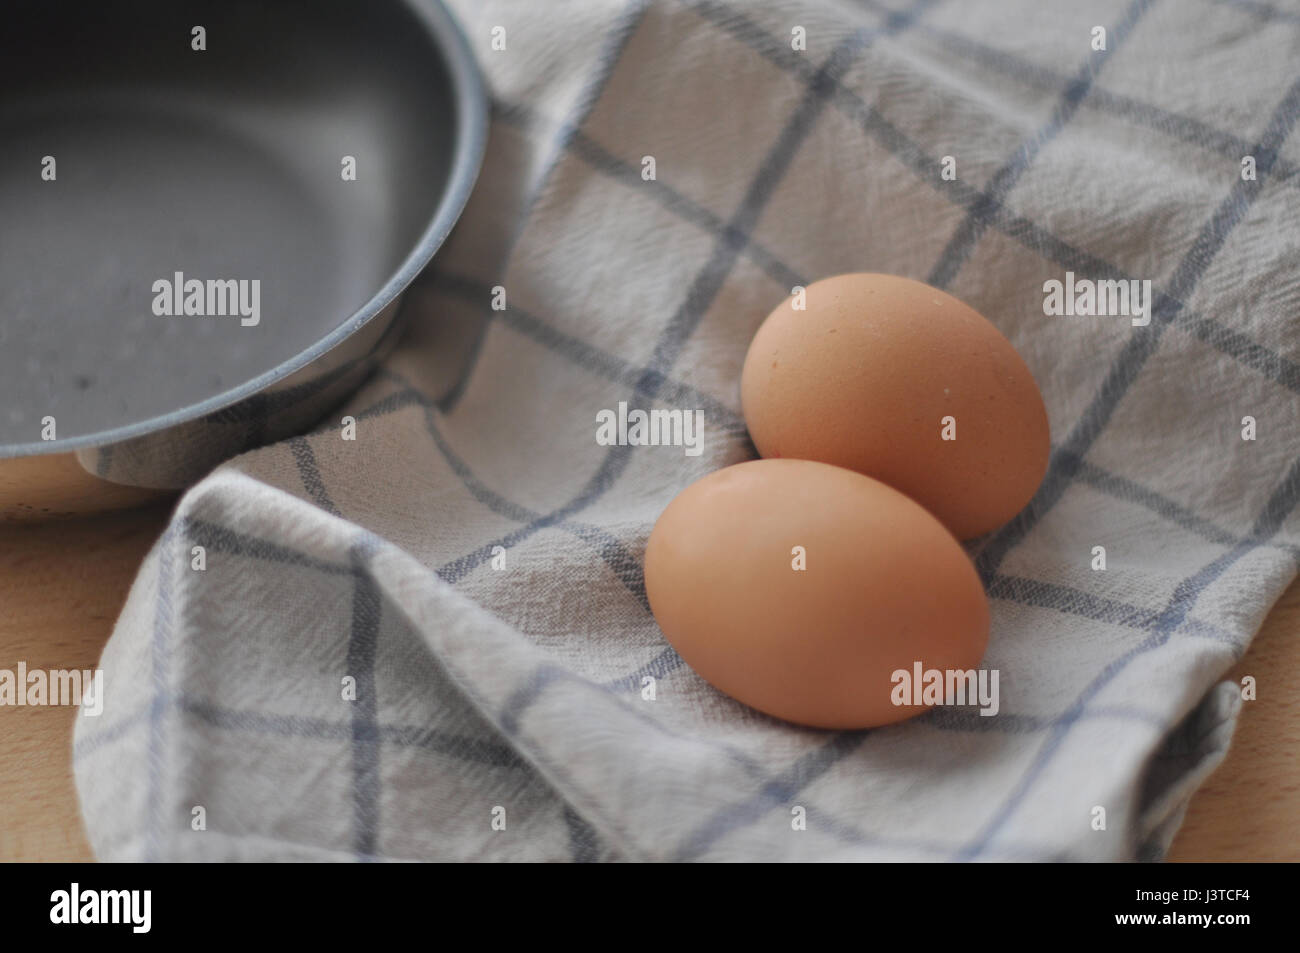 Two brown eggs over a kitchen cloth and a frying pan Stock Photo